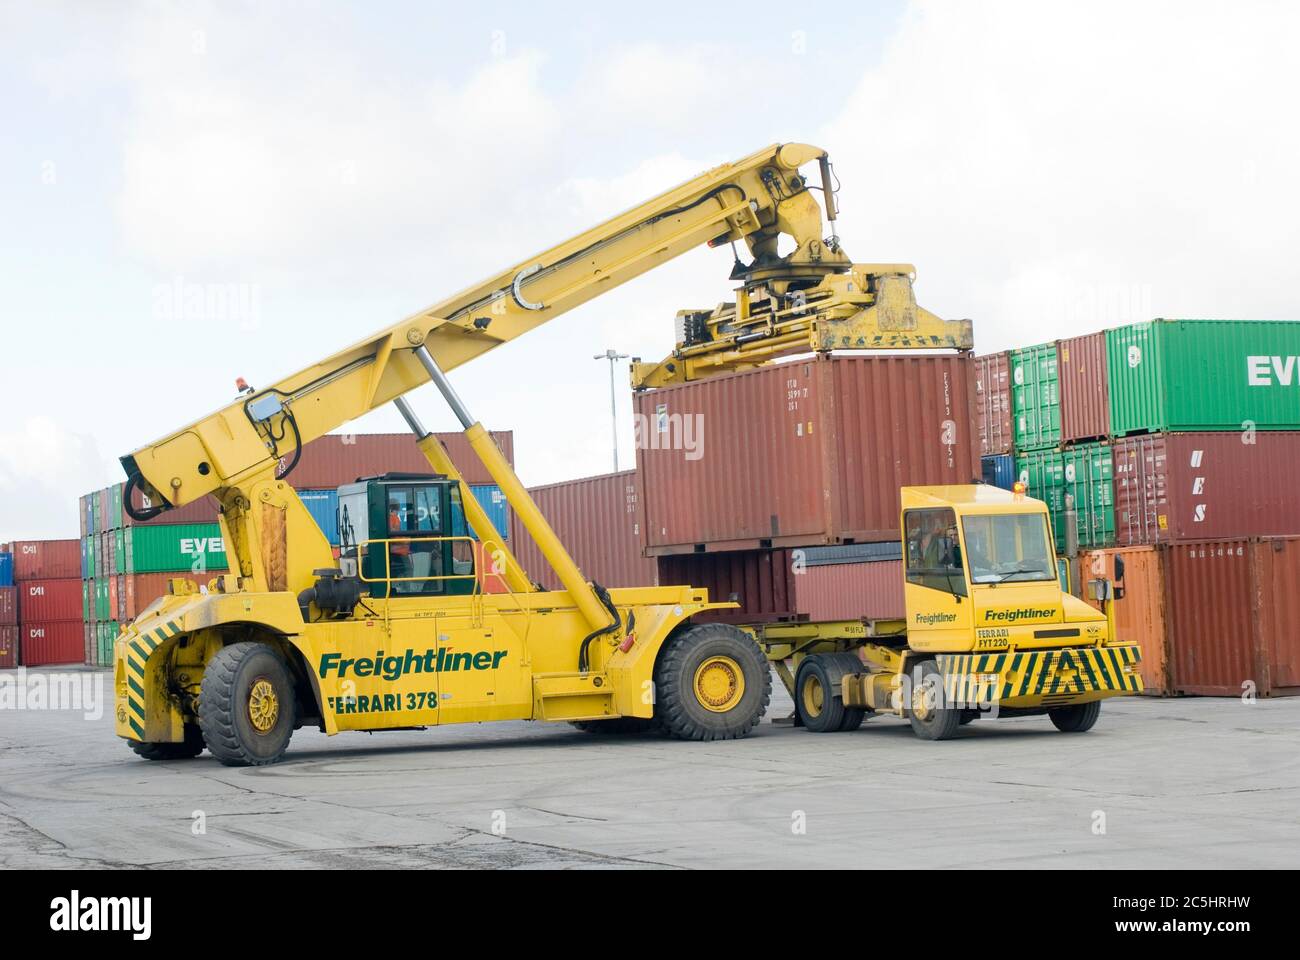 Cvs Ferrari Reach Stacker And Terminal Tractor Being Used To Move Shipping Containers At Manchester Euroterminal Trafford Park Manchester England Stock Photo Alamy